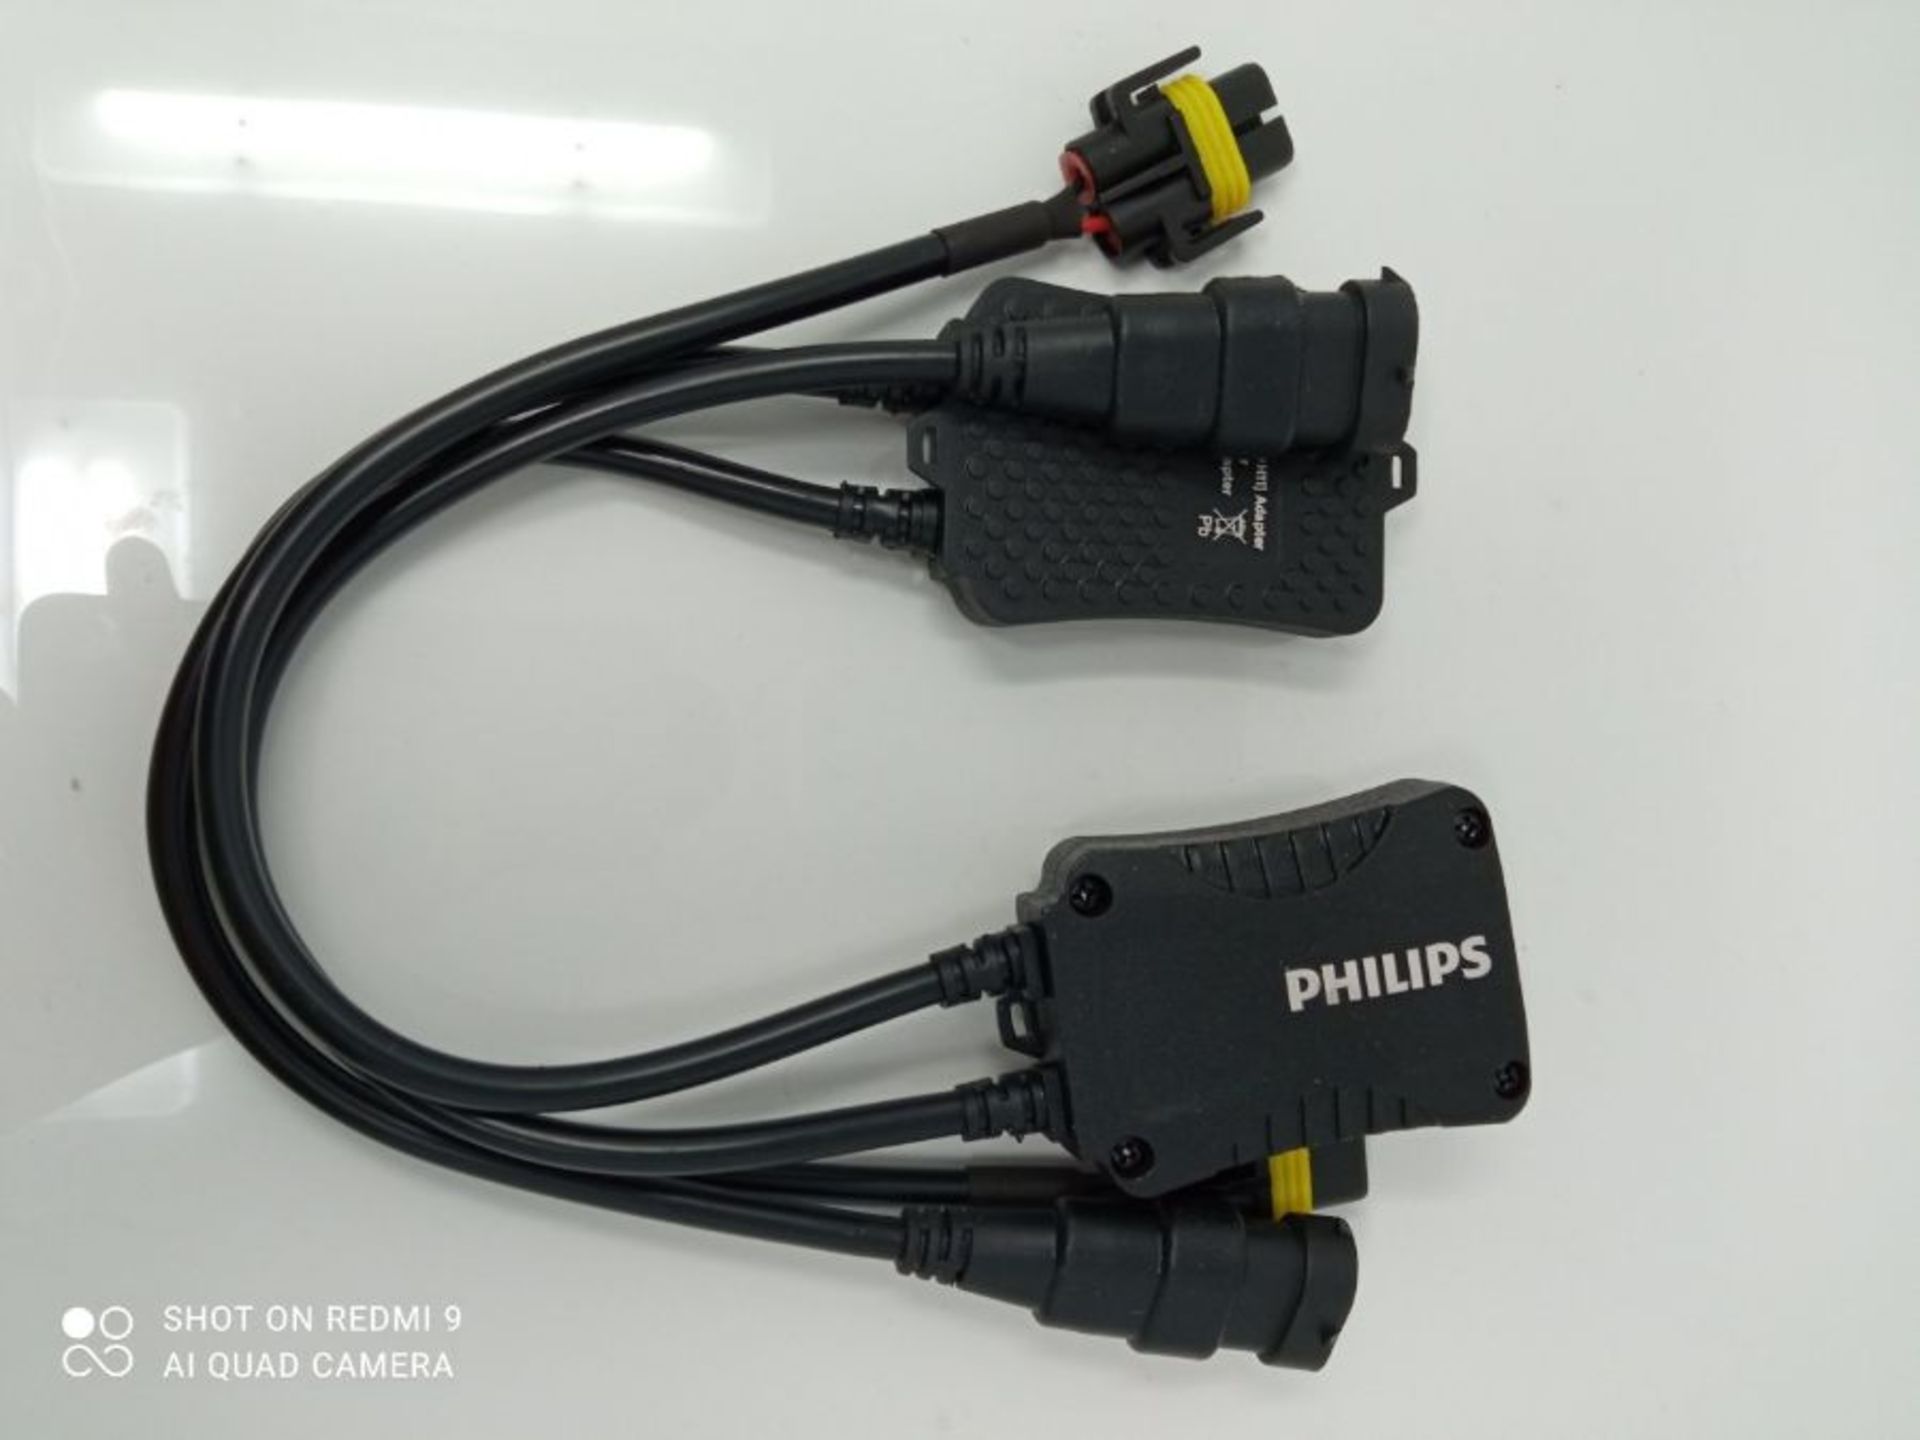 Philips, 5066394 Canbus LED Control Unit (H8/H11/H16) - Image 3 of 3